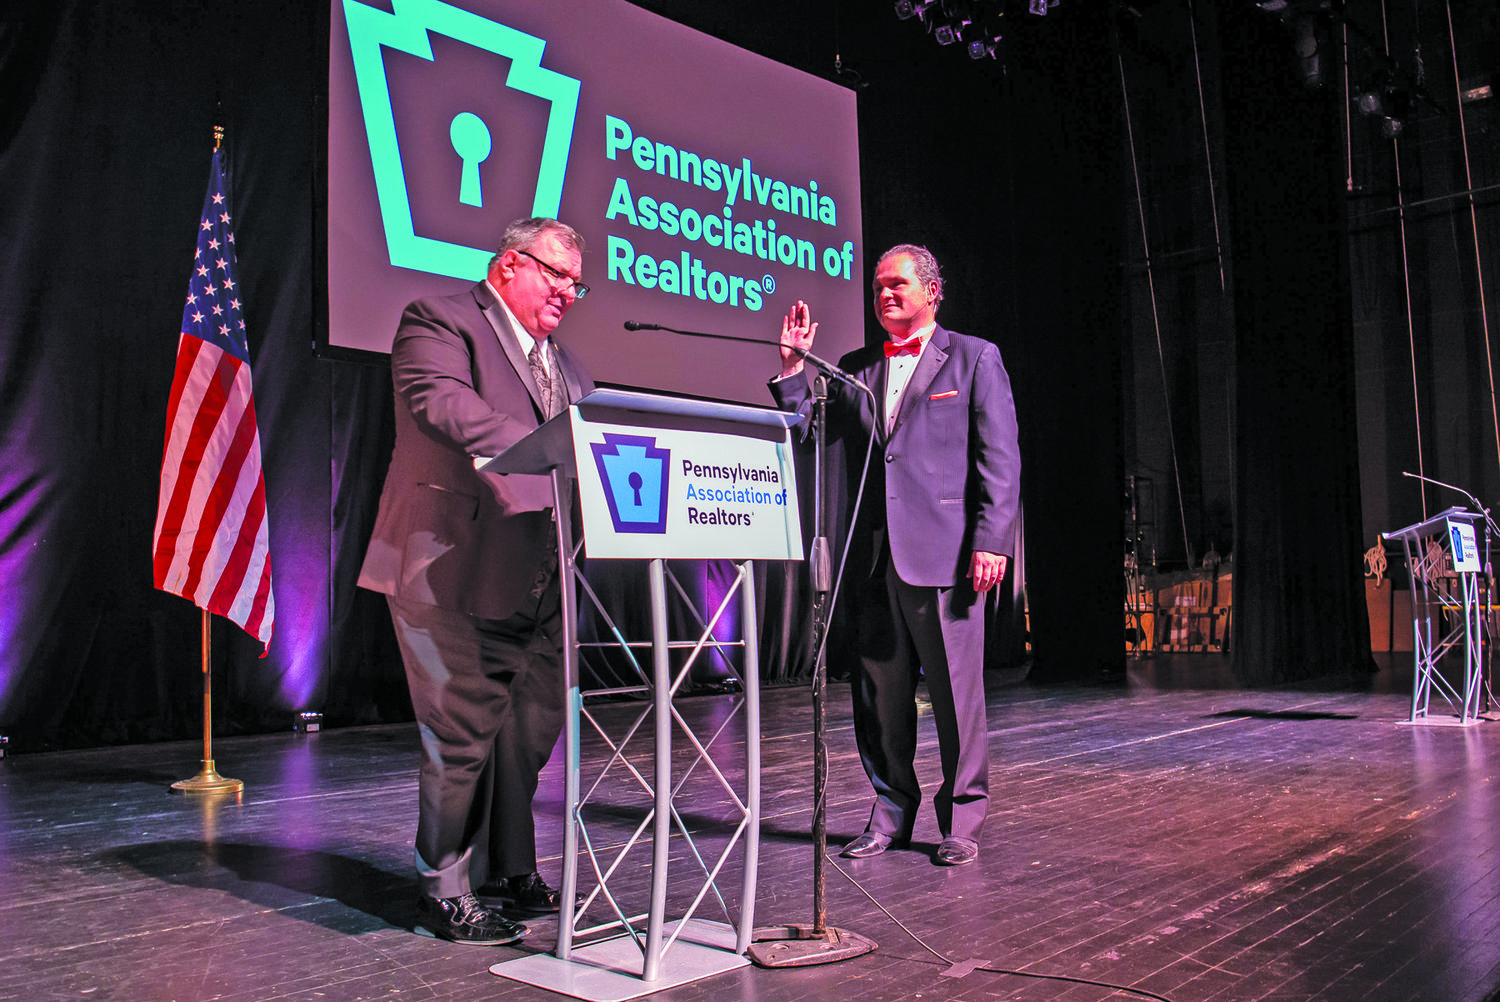 Bucks County Realtor Todd Polinchock, left, a past president of the Pennsylvania Association of Realtors® serving in 2016, welcomes Christopher Beadling, who was installed recently as the 2022 president.